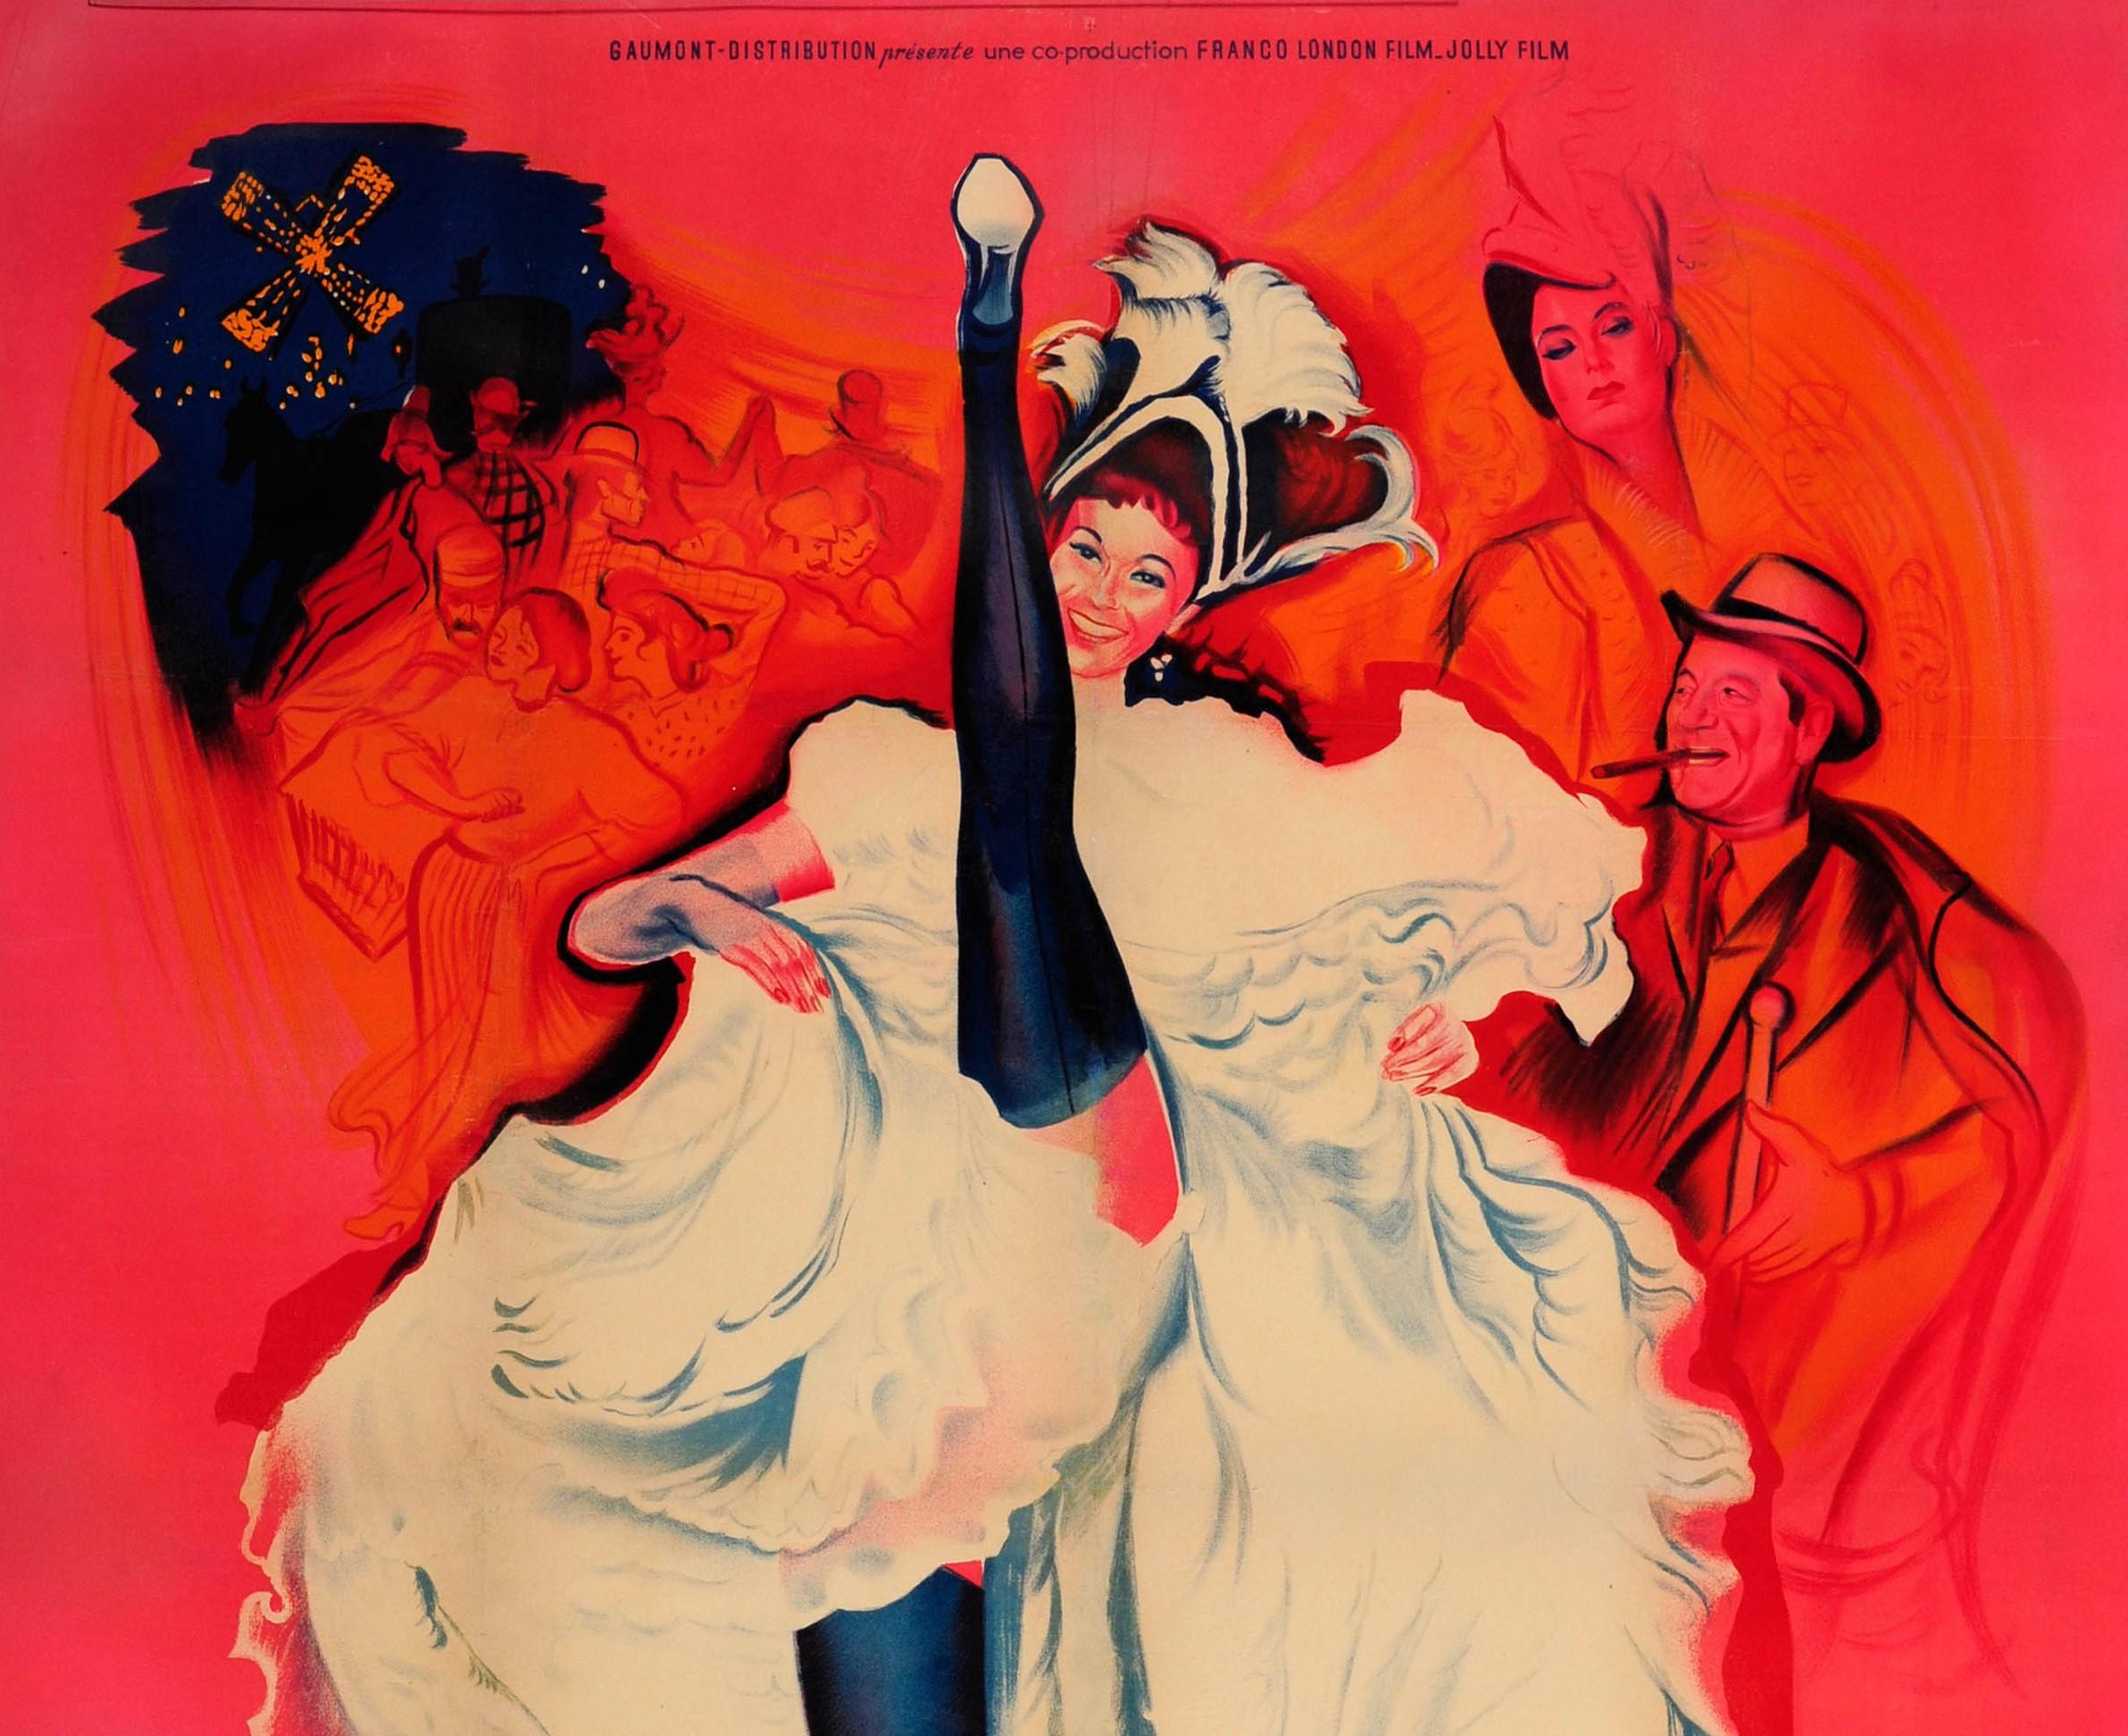 Original Vintage Musical Movie Poster French Cancan Ft Moulin Rouge Dancer Paris - Print by Rene Peron